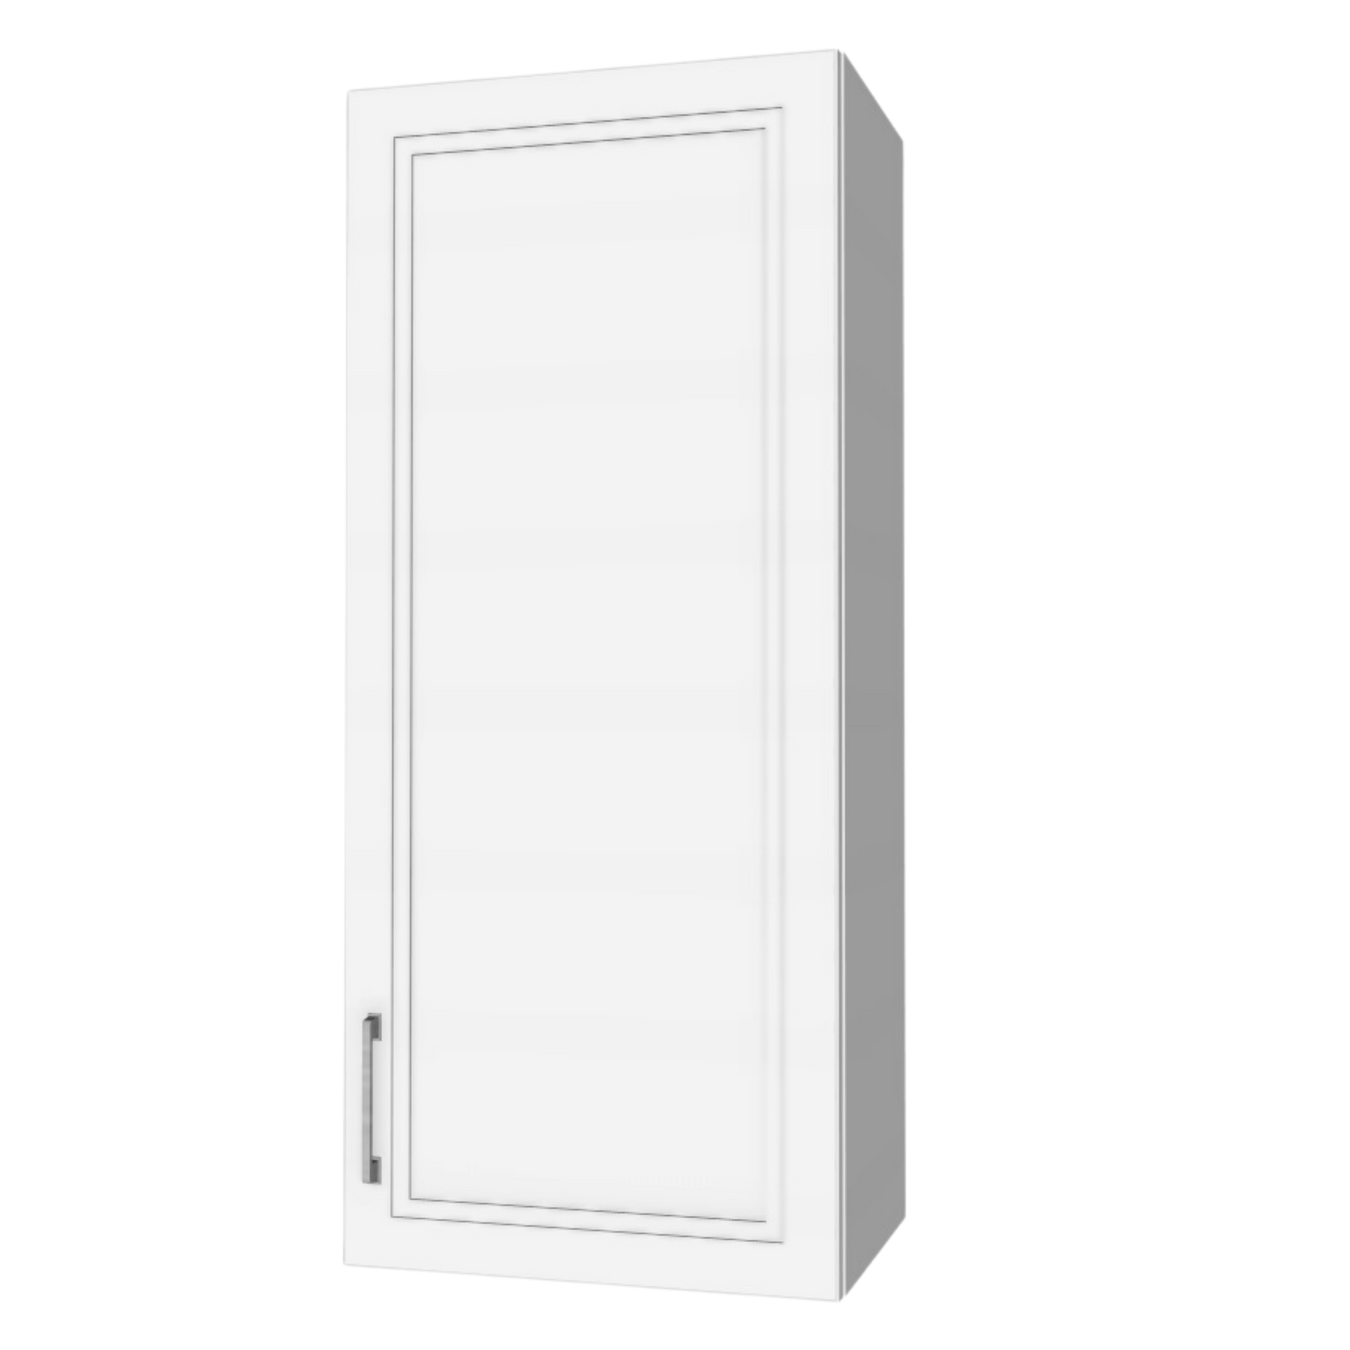 42" High Wall Cabinets - Painted Doors